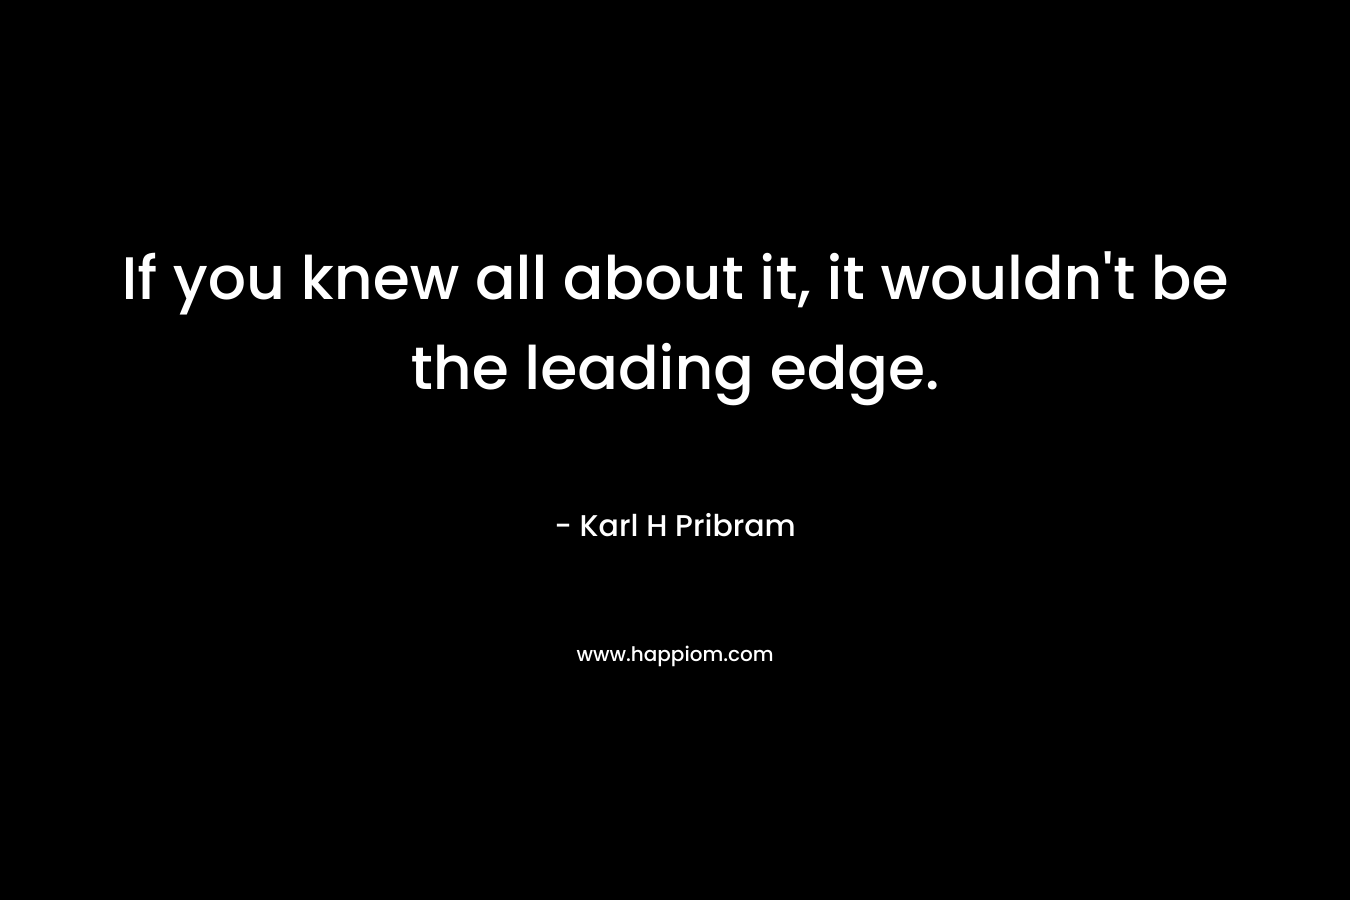 If you knew all about it, it wouldn't be the leading edge.